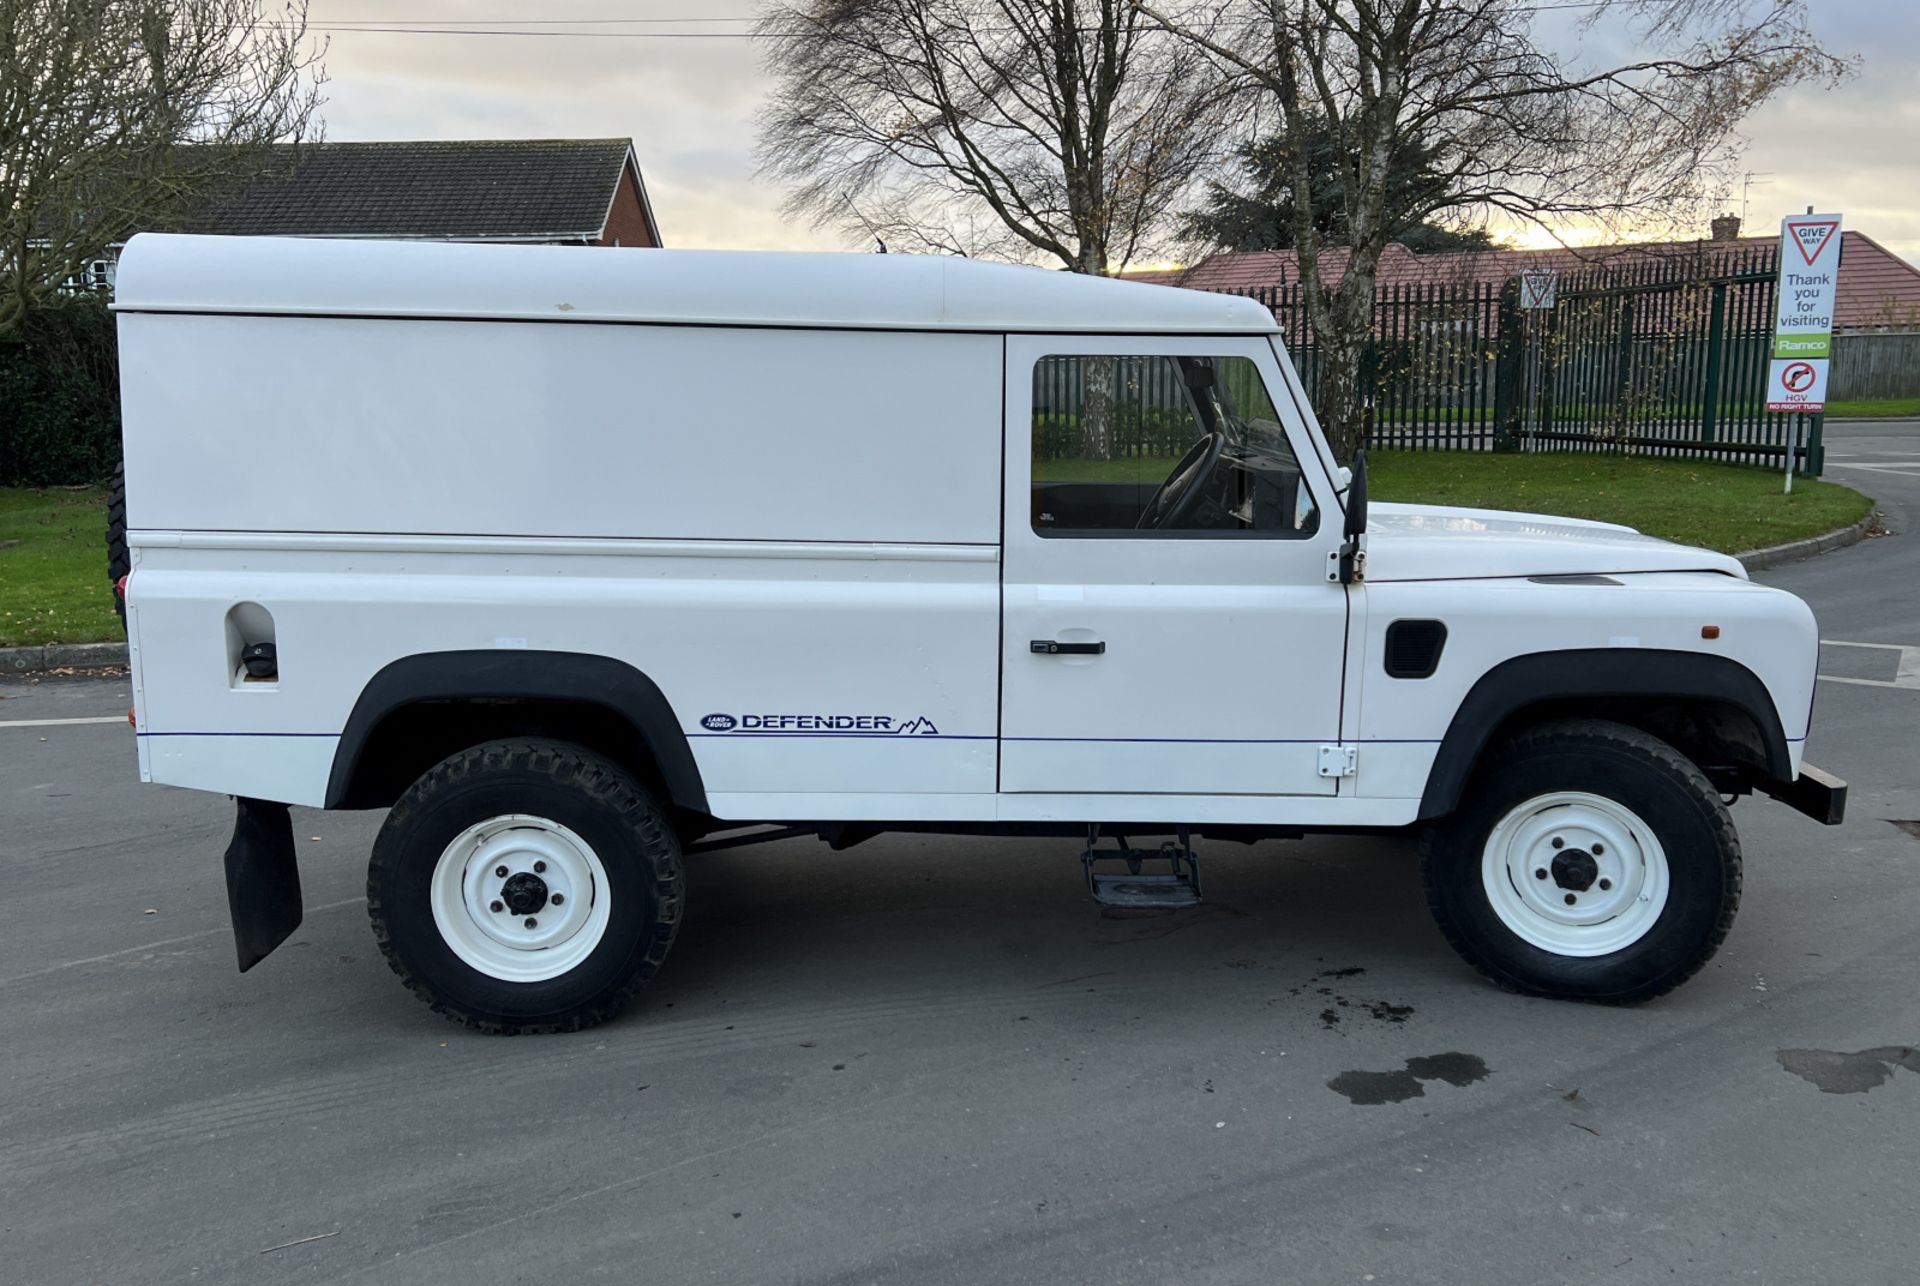 Land Rover Defender 110TDI - 1995 - Very low mileage at 24095 miles - 2.5L diesel - white - Image 7 of 49